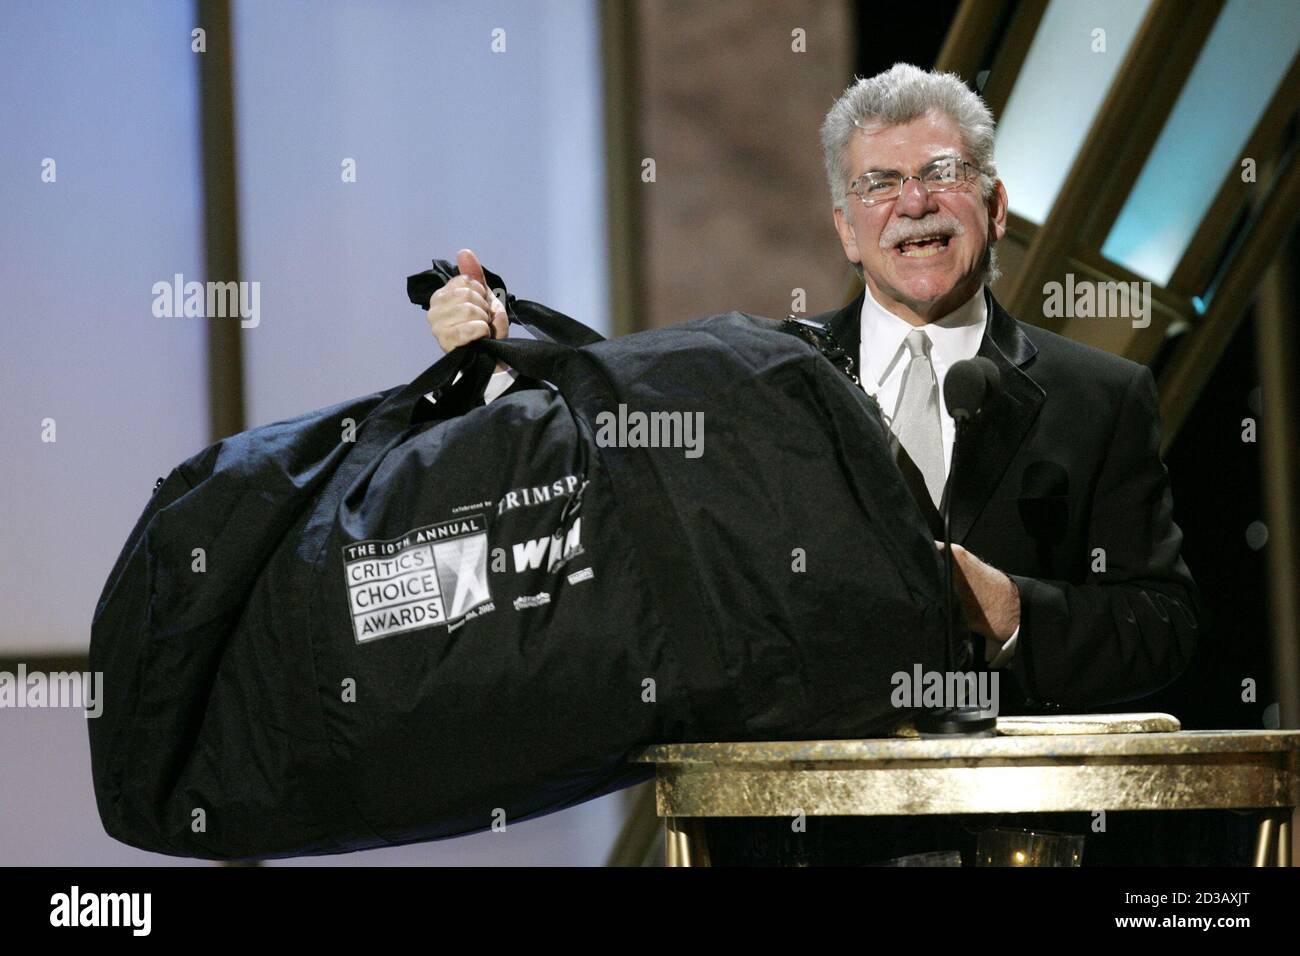 Film critic Joel Siegel holds a celebrity gift bag during the 10th Annual Critic's Choice Awards at the Wiltern Theater in Los Angeles, California January 10, 2005. Organisers of the awards and celebrities are signing their gift bags, which will be used to raise funds for victims of the December 26 Asian tsunami. REUTERS/Robert Galbraith  SSM/FA Stock Photo